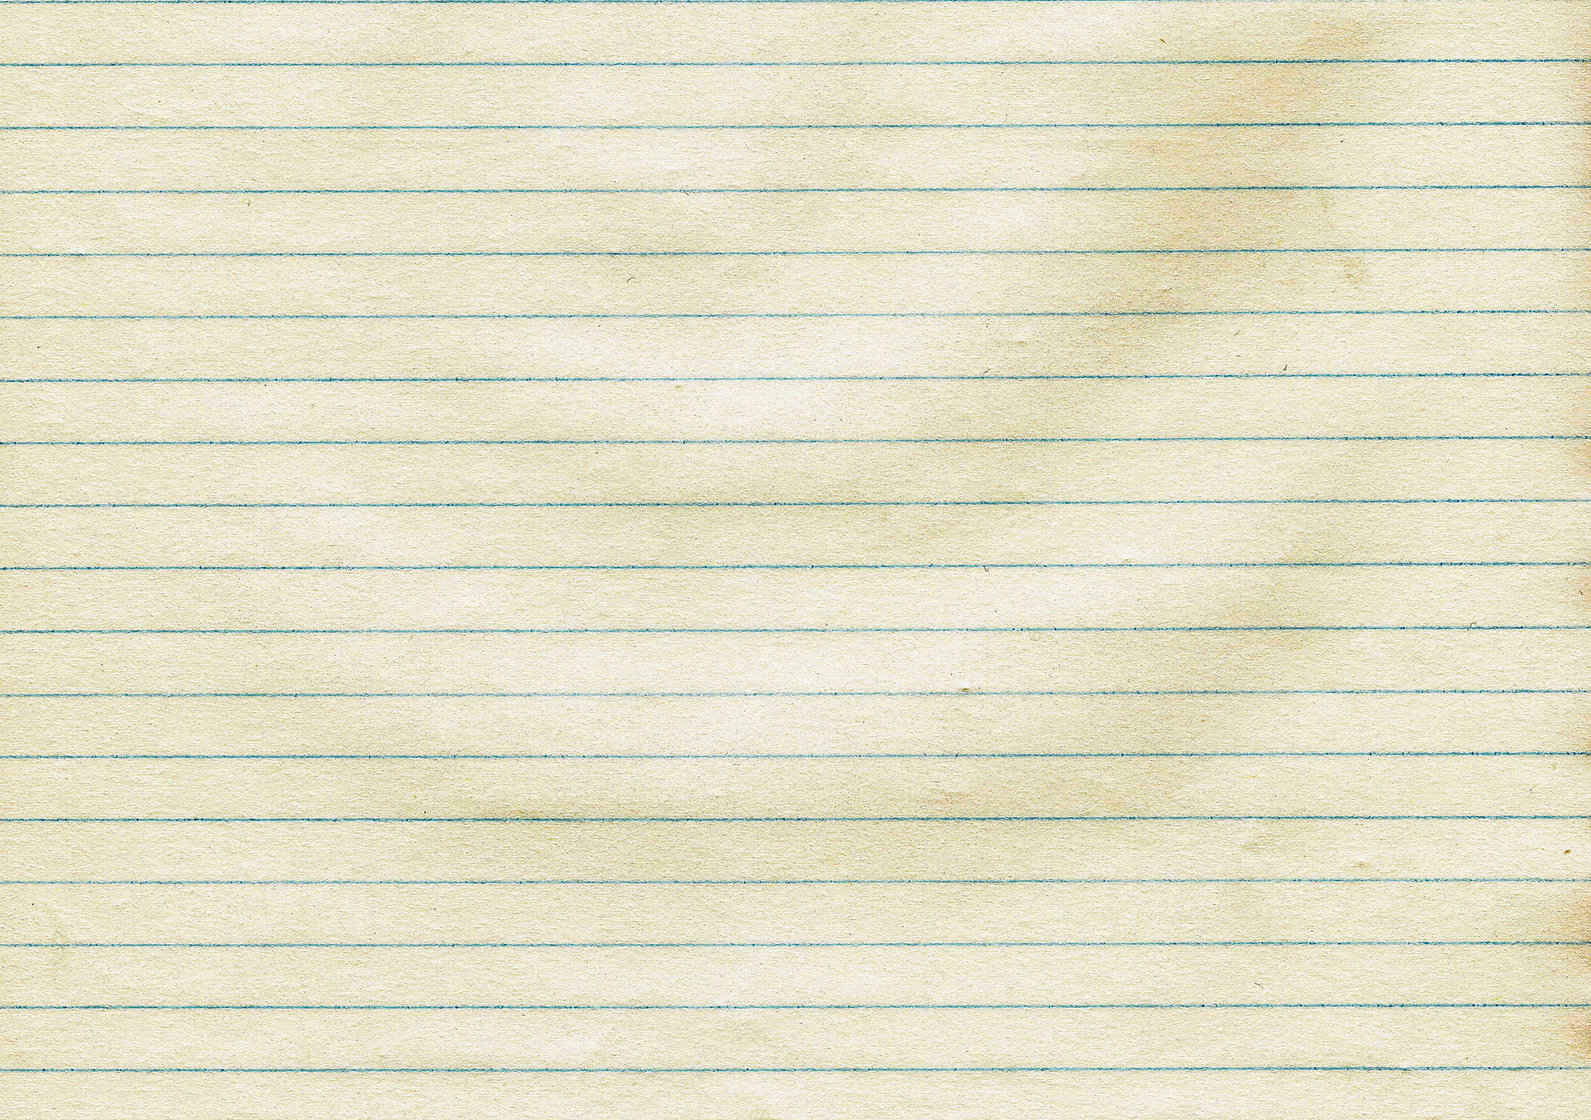 Lined Paper Texture